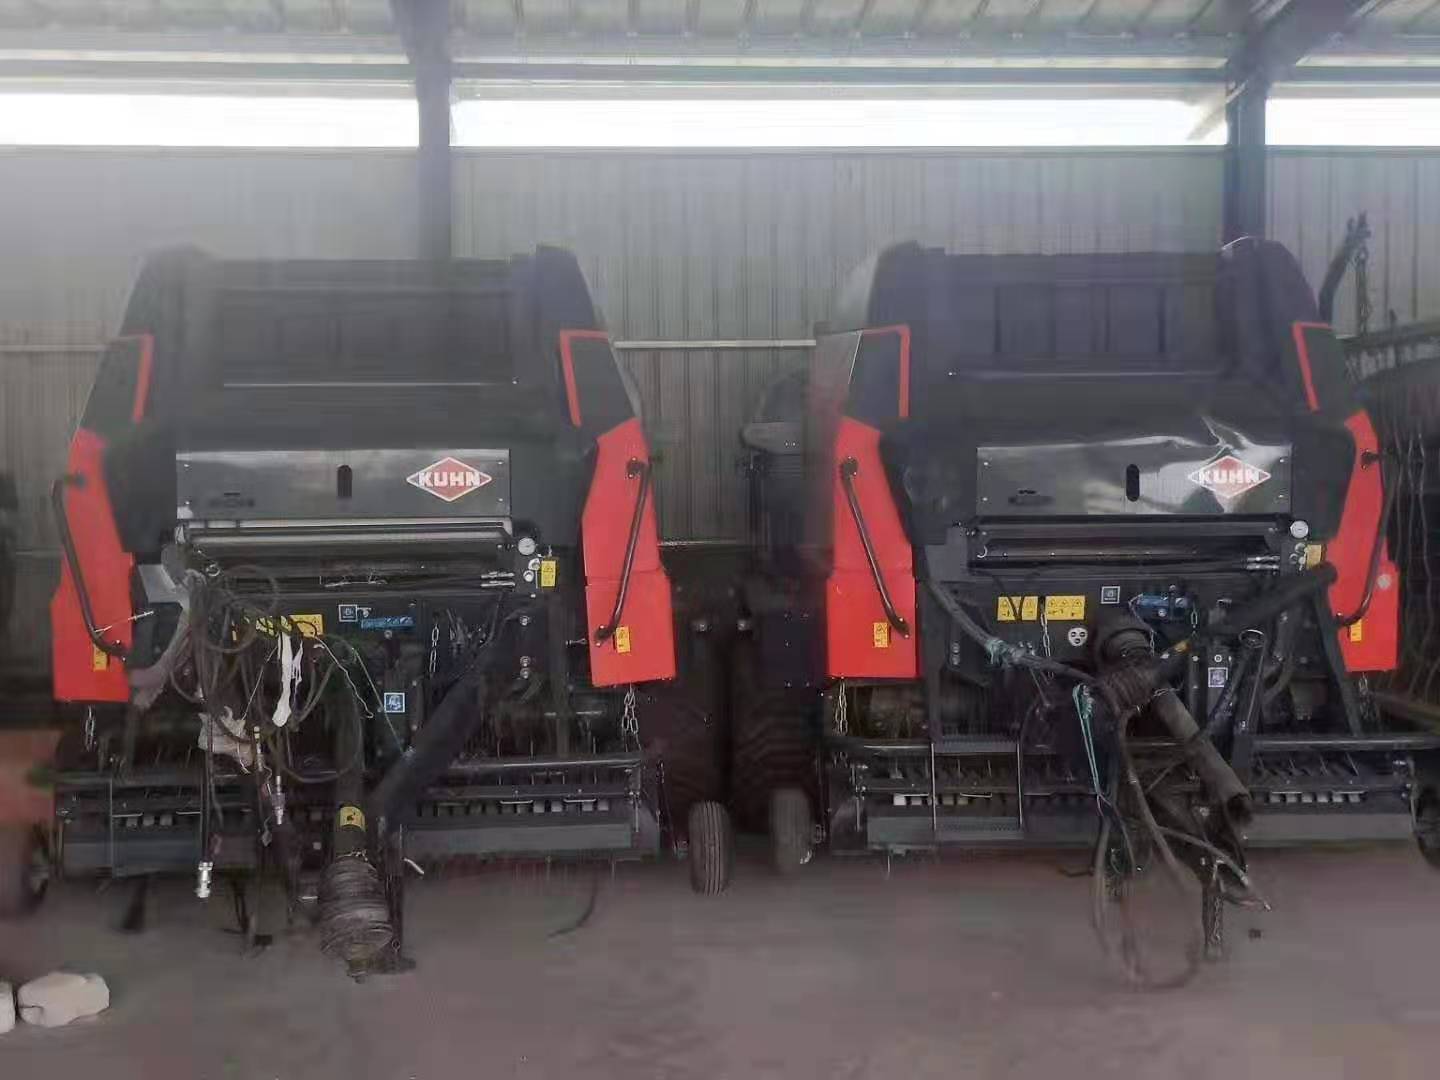 2018 Year almost New machine of Kuhn VBP 2265 baler and wrapping for sale(图6)